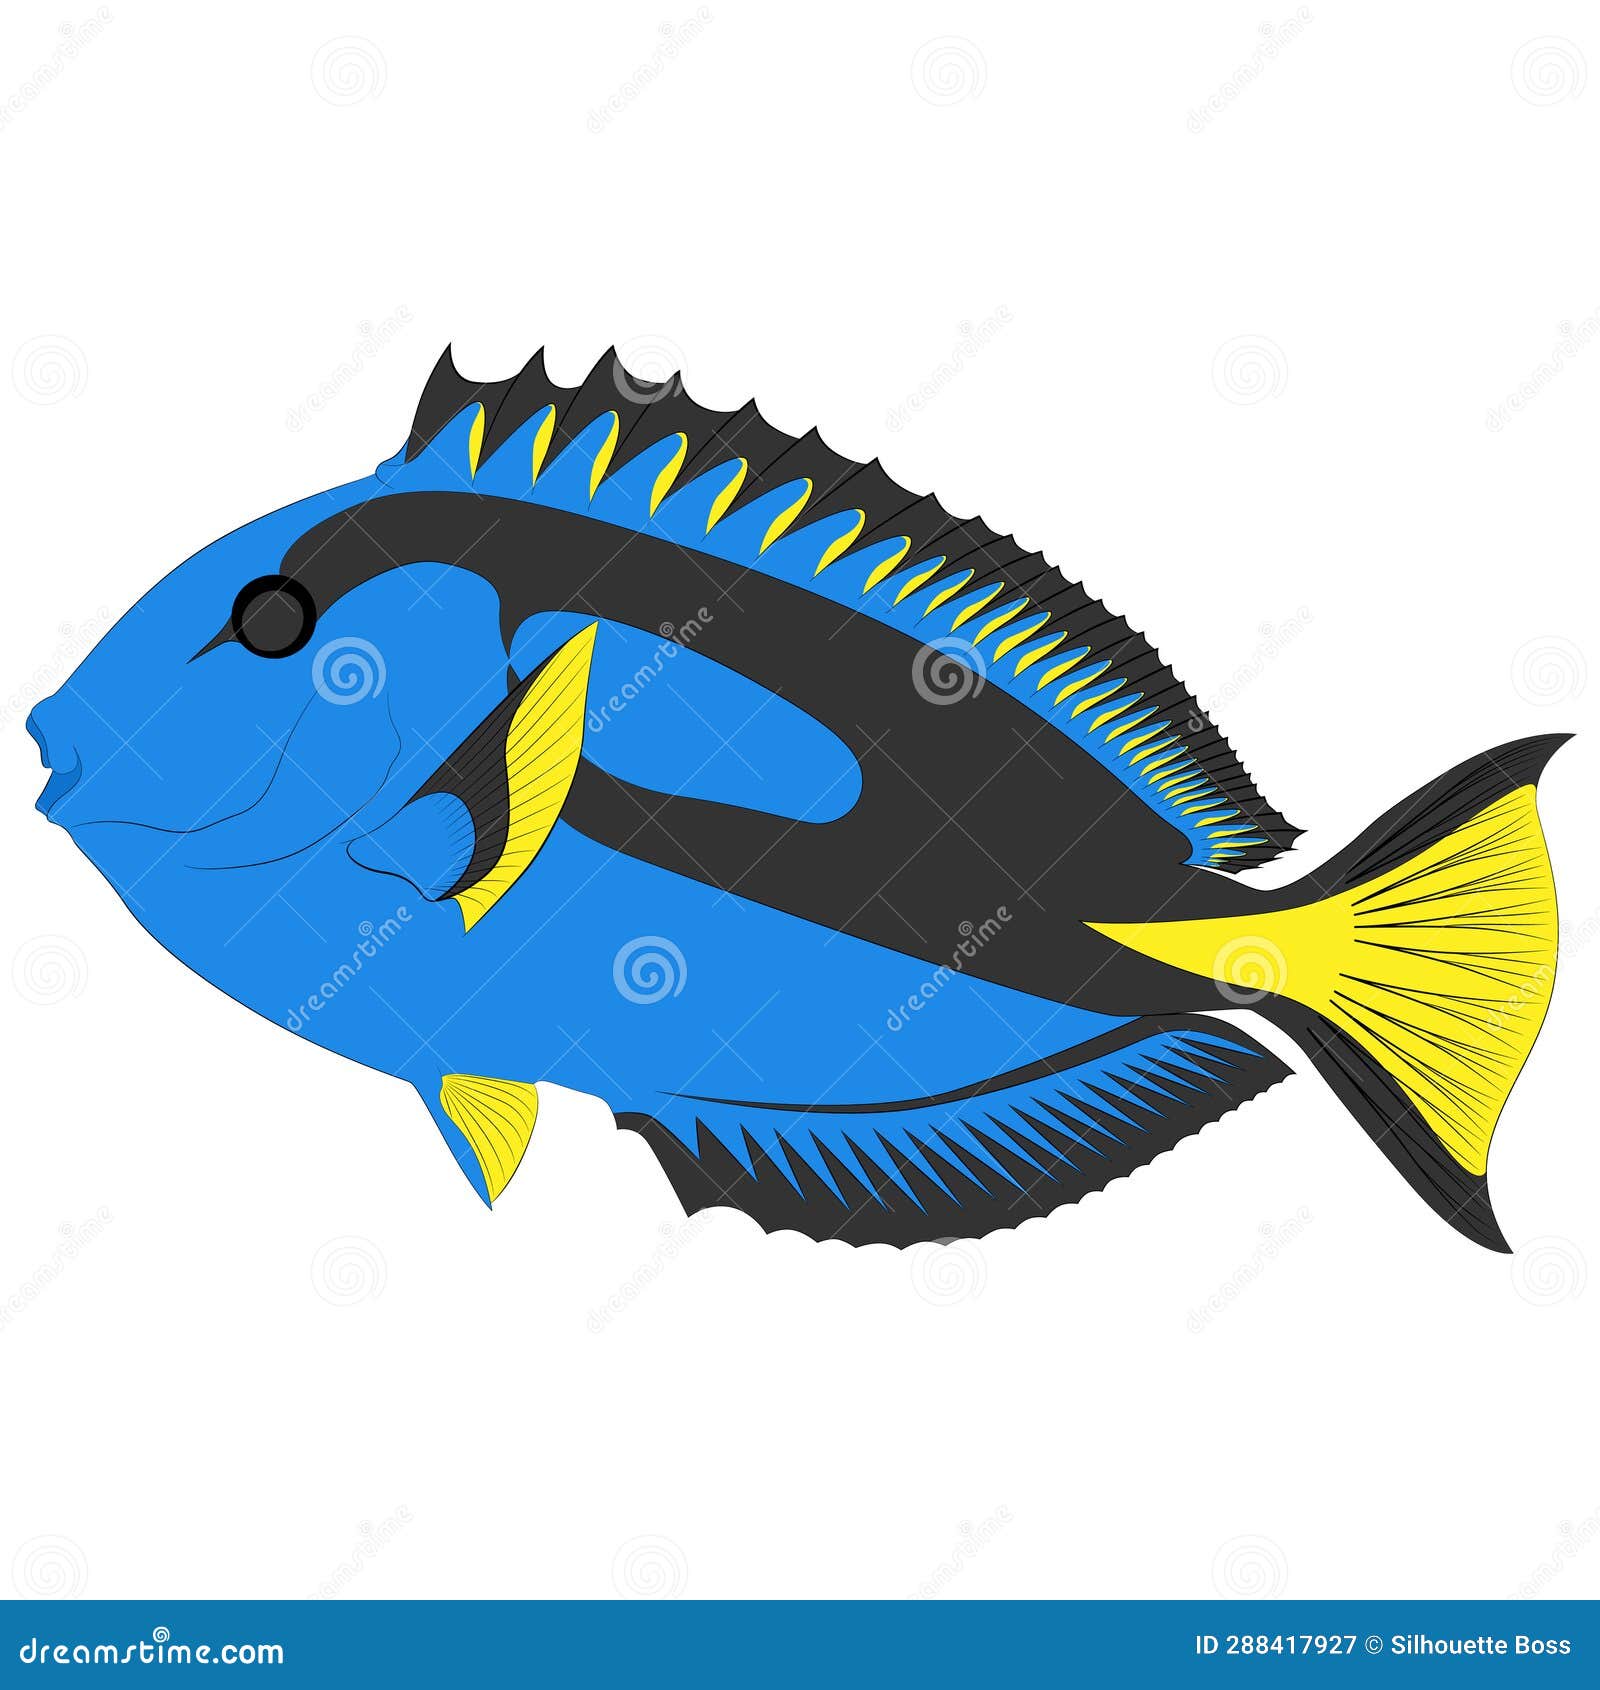 https://thumbs.dreamstime.com/z/paracanthurus-hepatus-blue-tang-doctor-fish-surgeonfish-flag-tail-graphic-illustrations-pallet-288417927.jpg